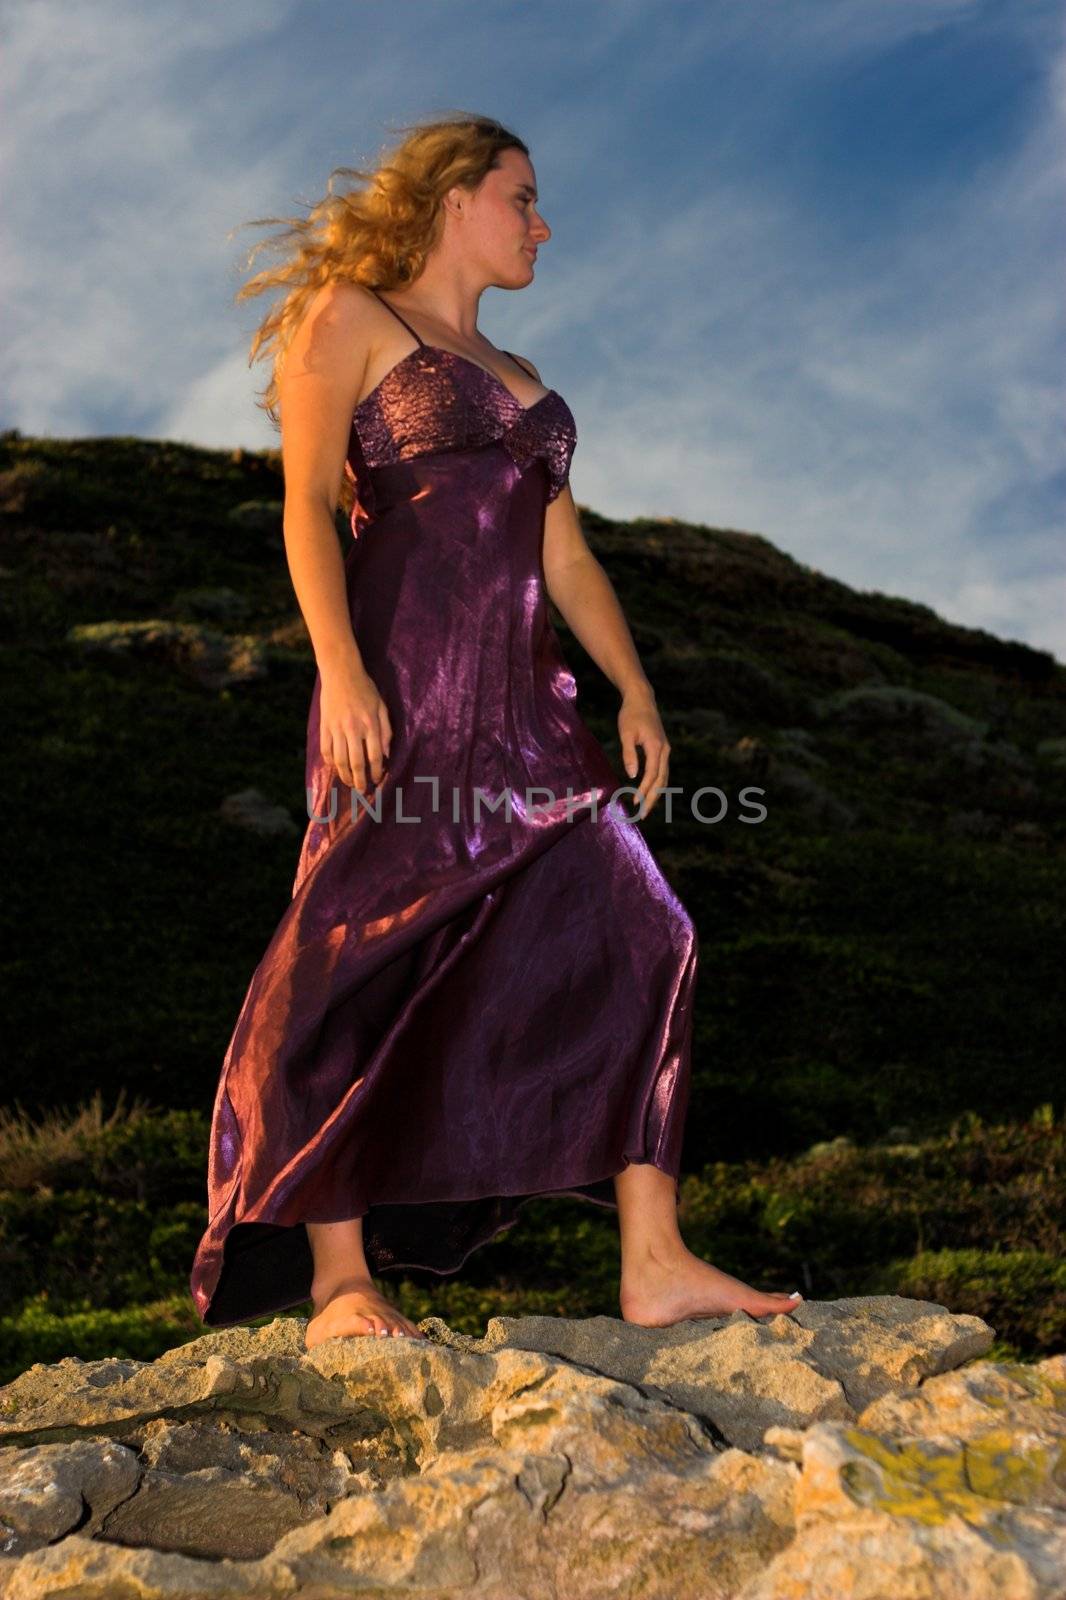 Girl standing on a rock in a purple dress and her hair blowing in the wind